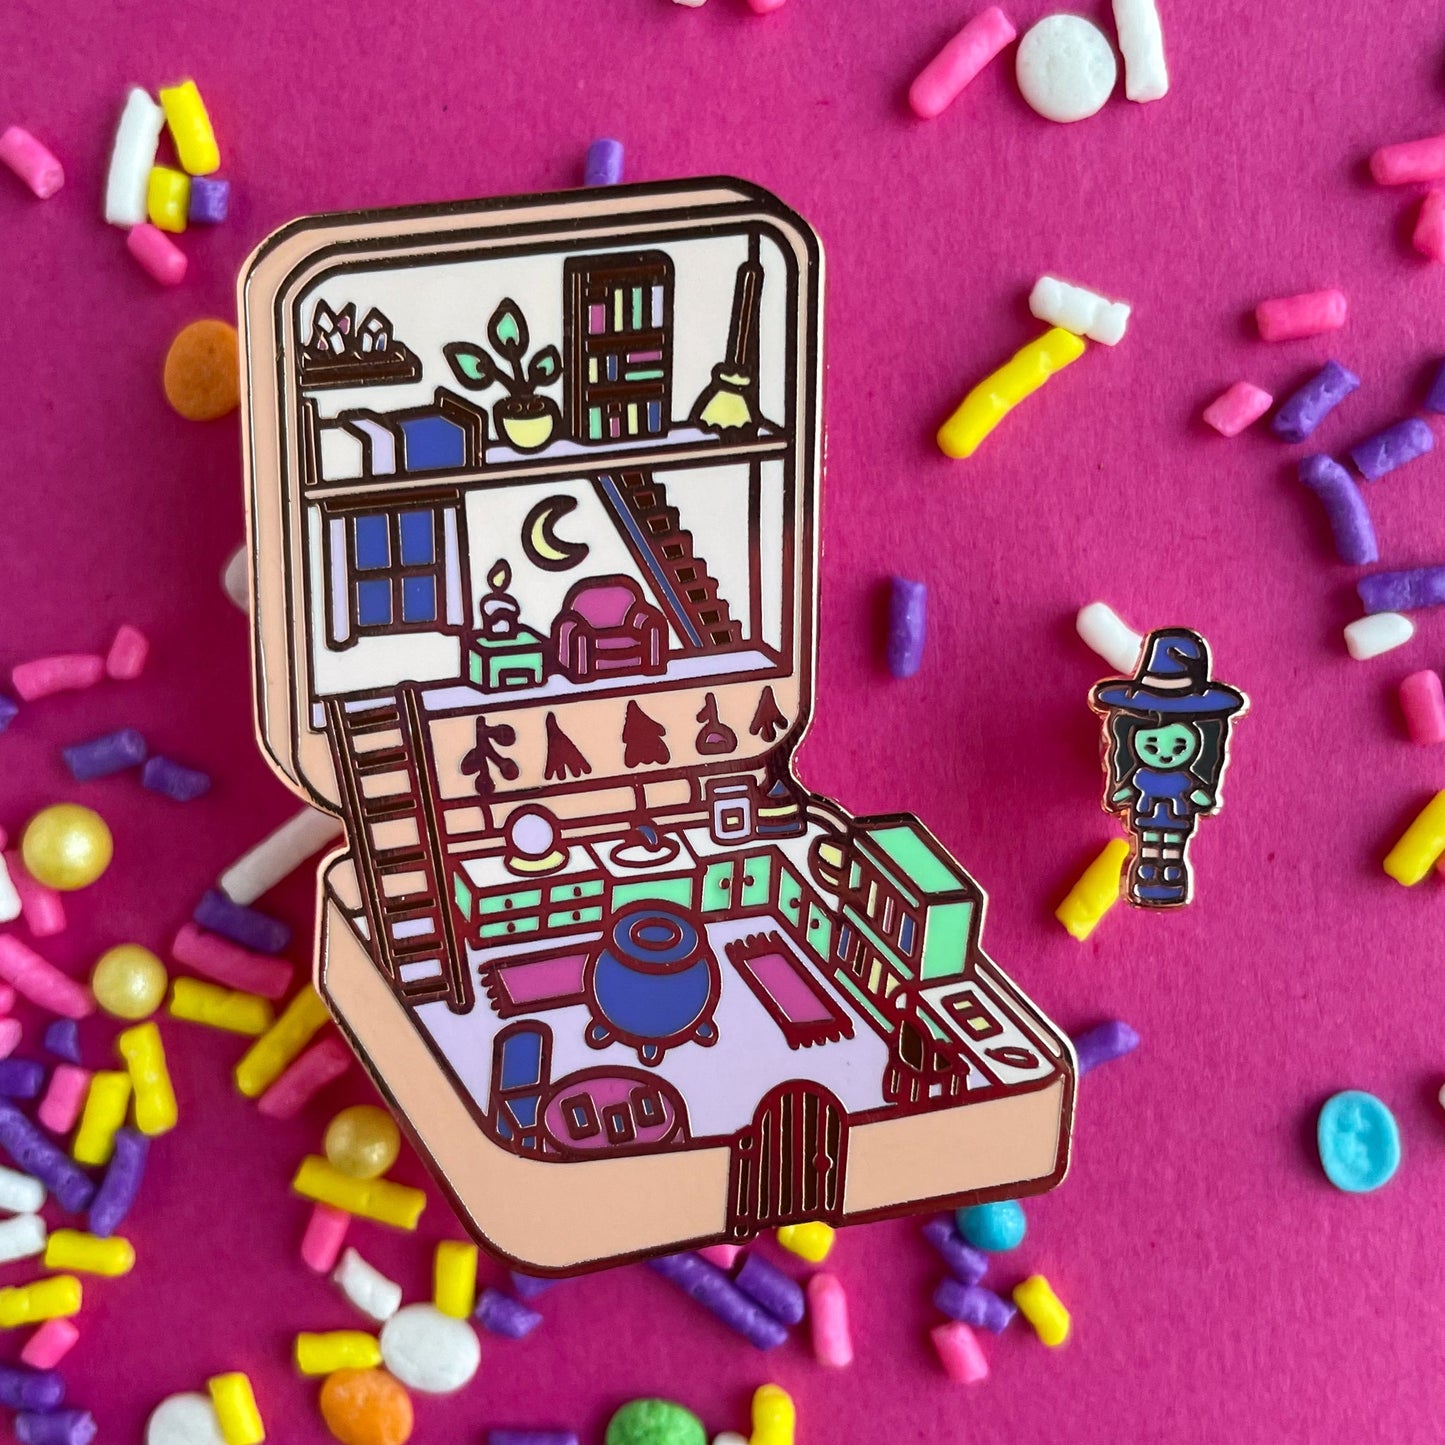 A pin set that is a Polly Pocket style compact of a witch house with a little witch mini doll. The compact house has a cauldron, crystal ball, tarot cards, crystals, and a broom. The compact is a pastel peach color with mint green, hot pink and purple details. The pins are on a hot pink background that is covered in pastel sprinkles.